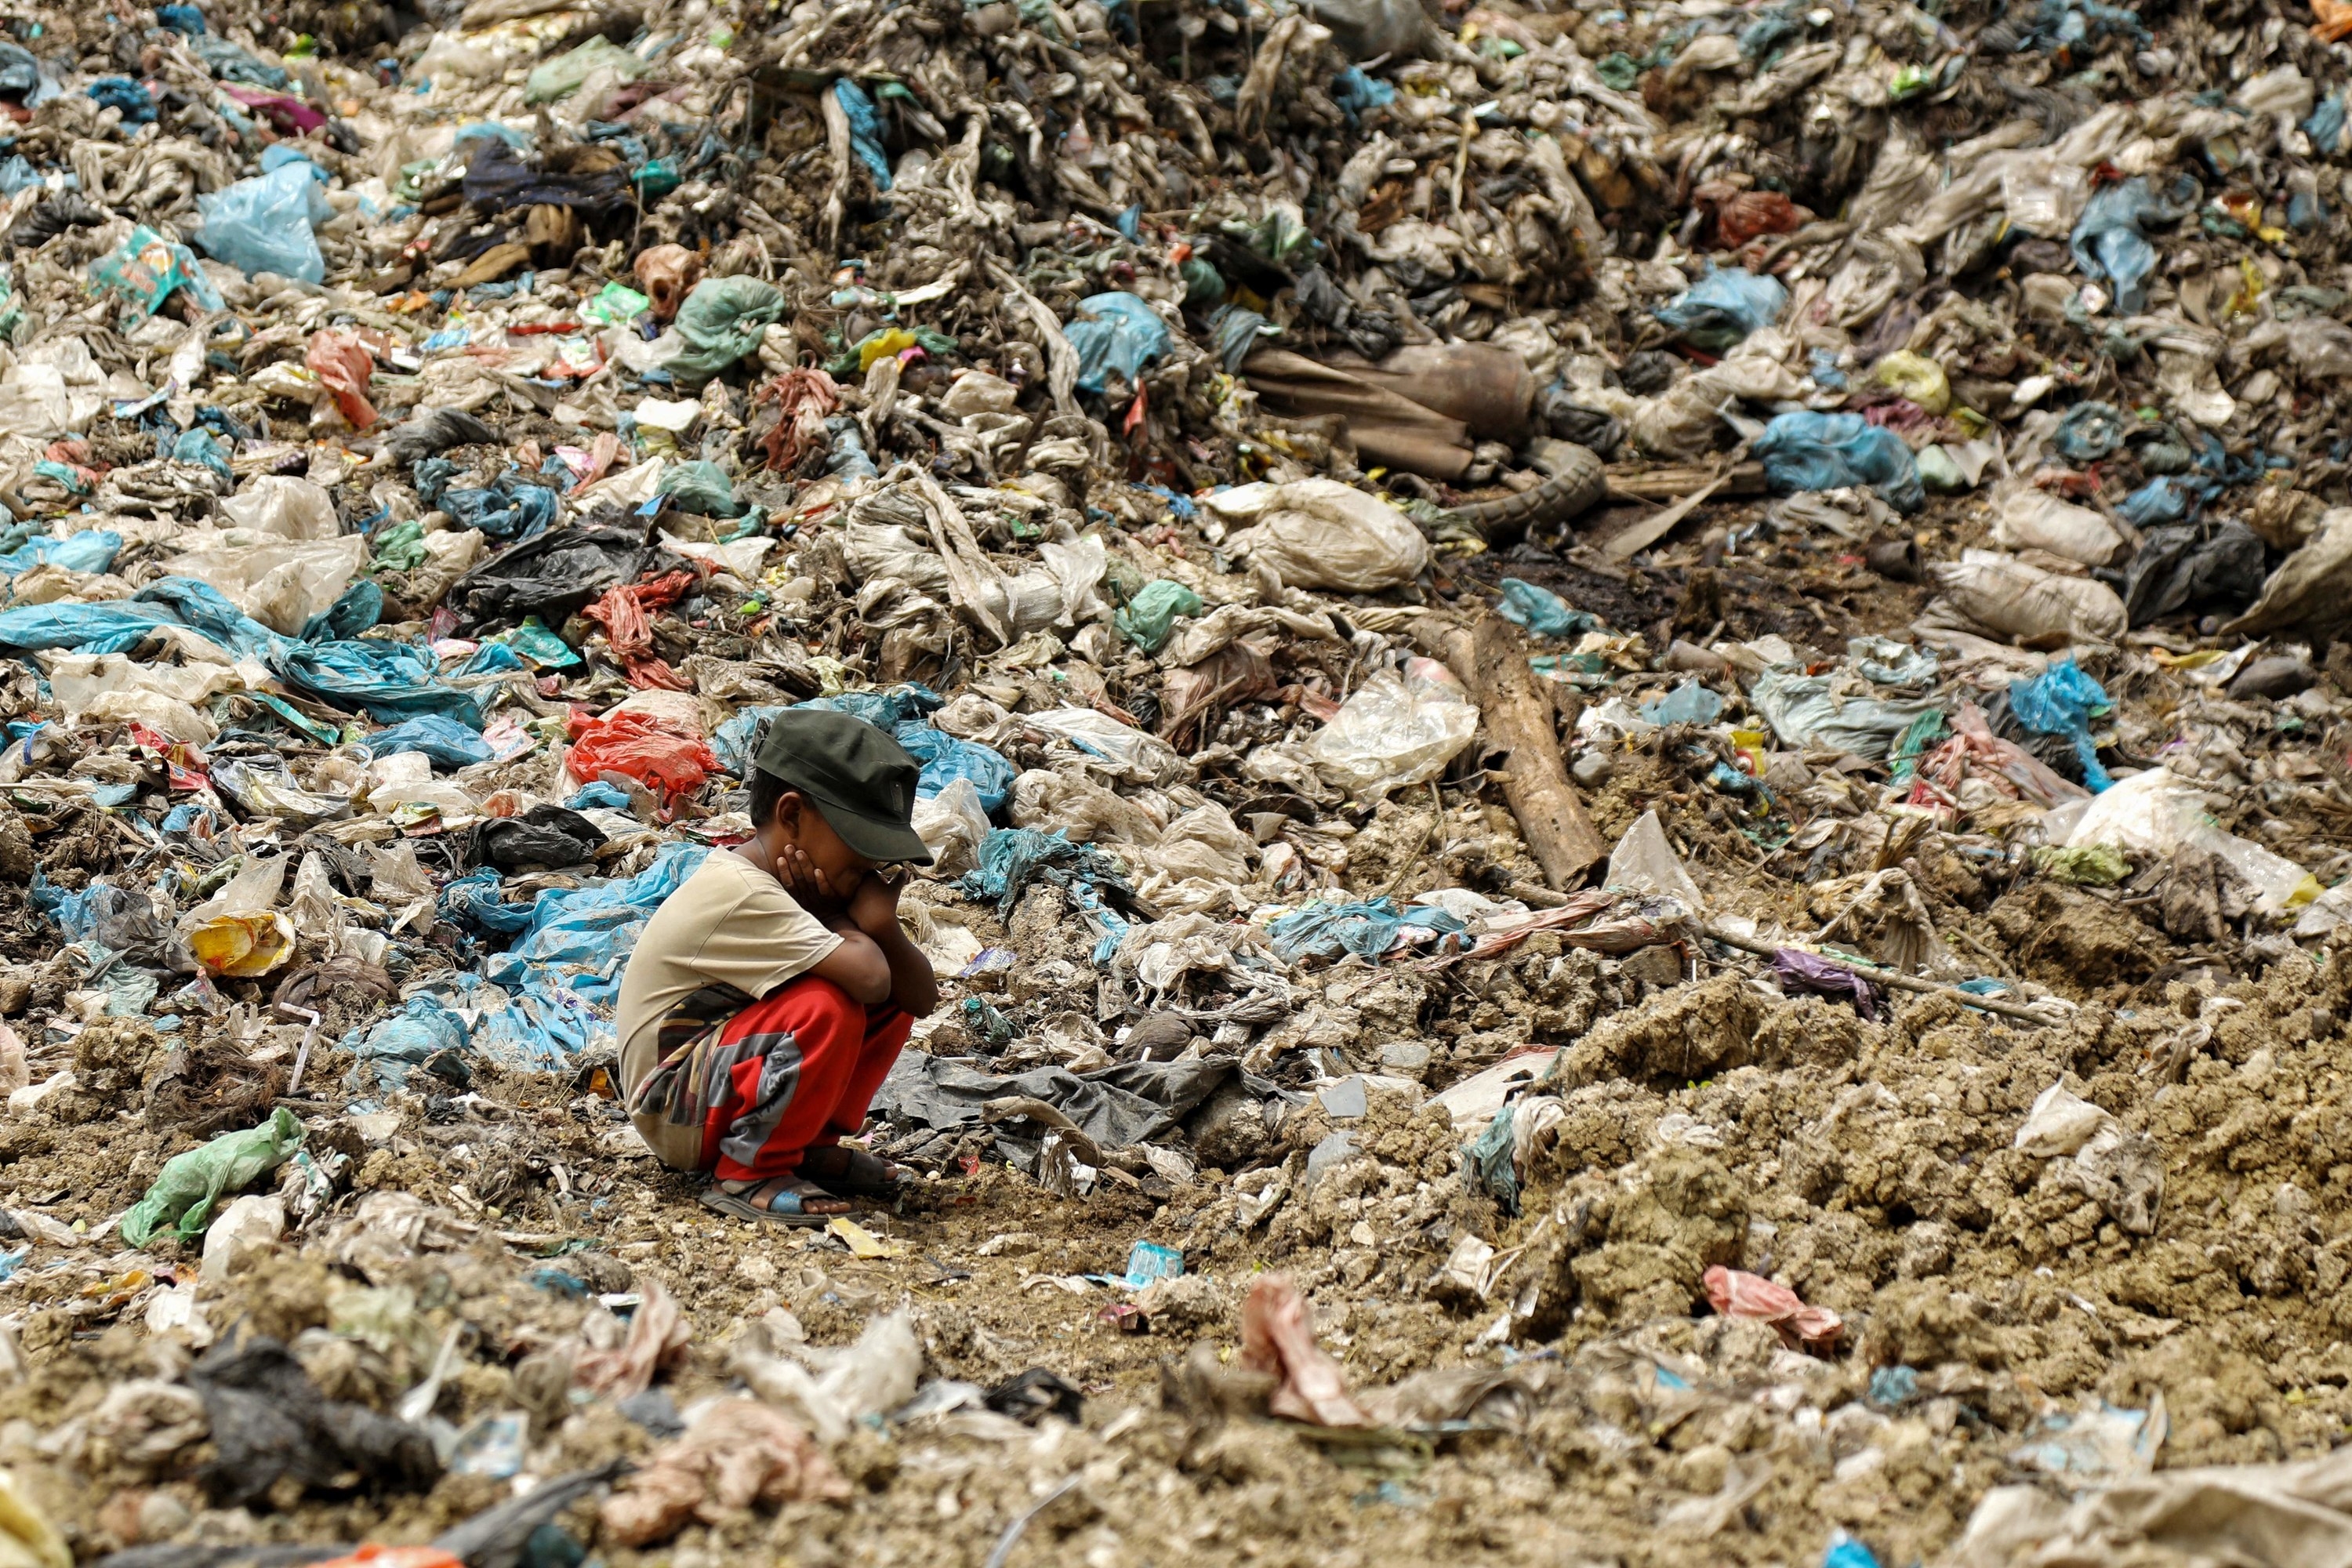 Raw Photo Of Landfills Show The Extreme Amount Of Waste Humans Produce